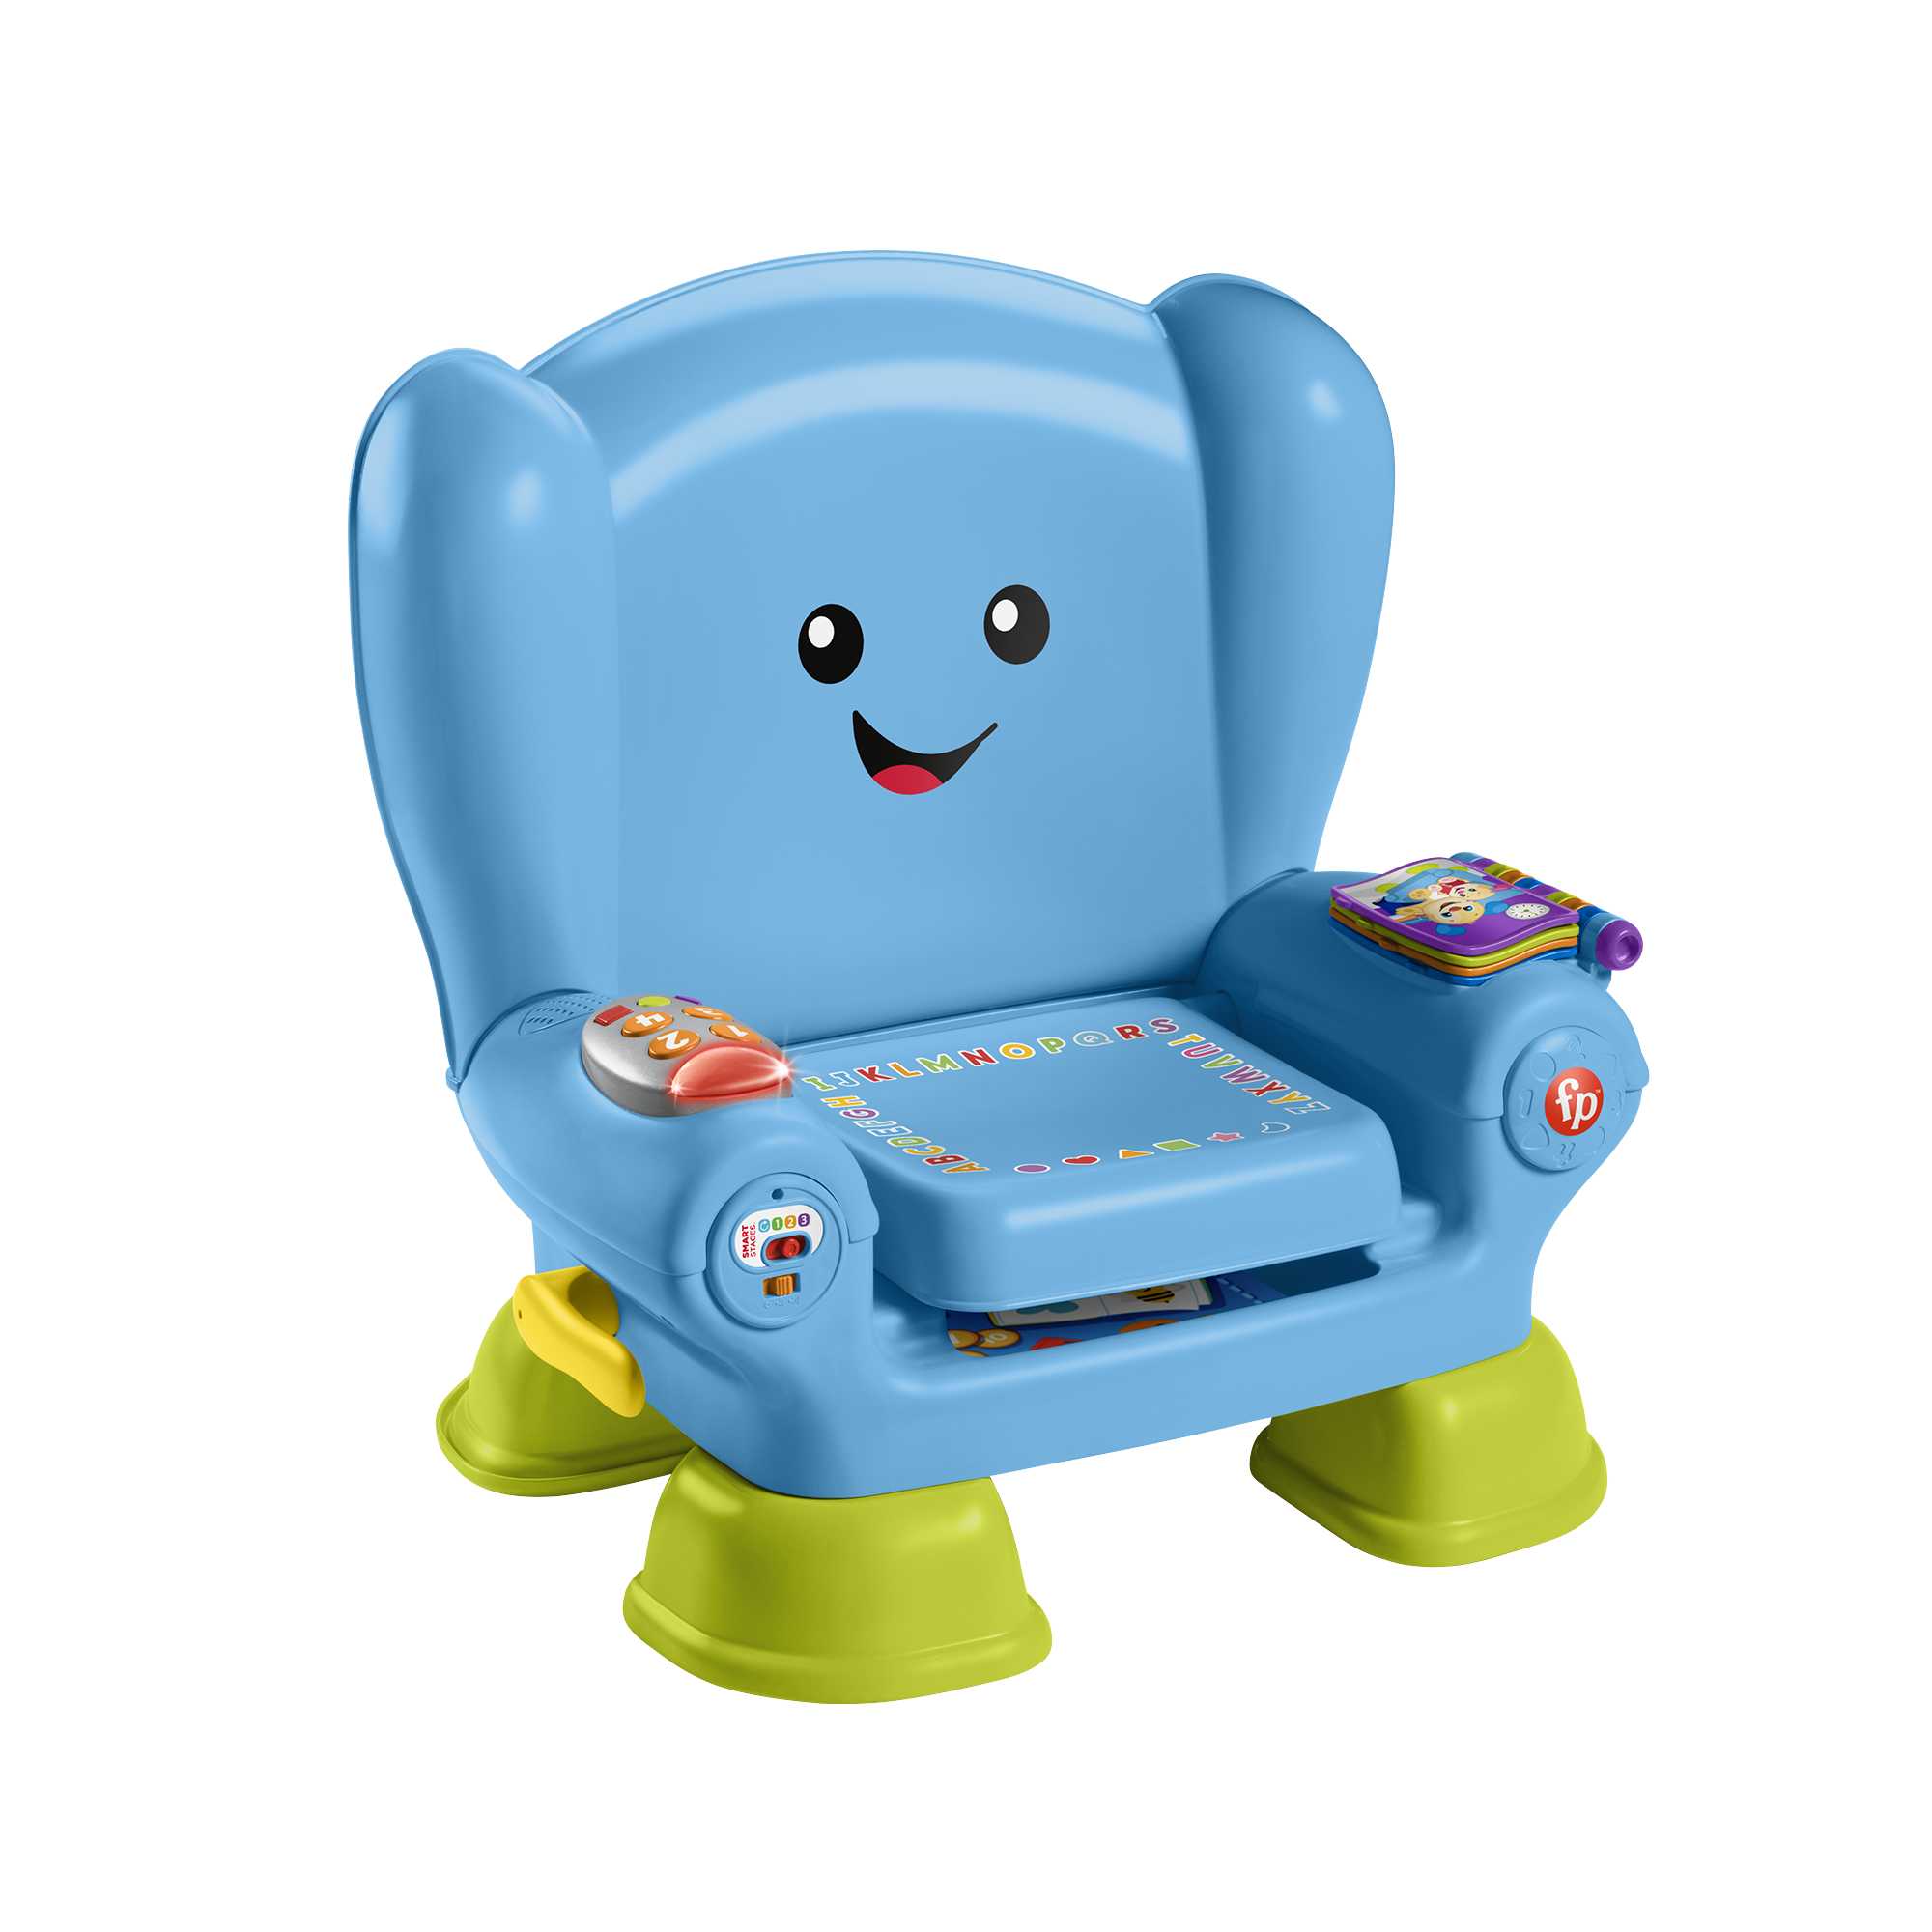 Laugh & Fisher-Price Laugh Learn Smart Chair Mattel